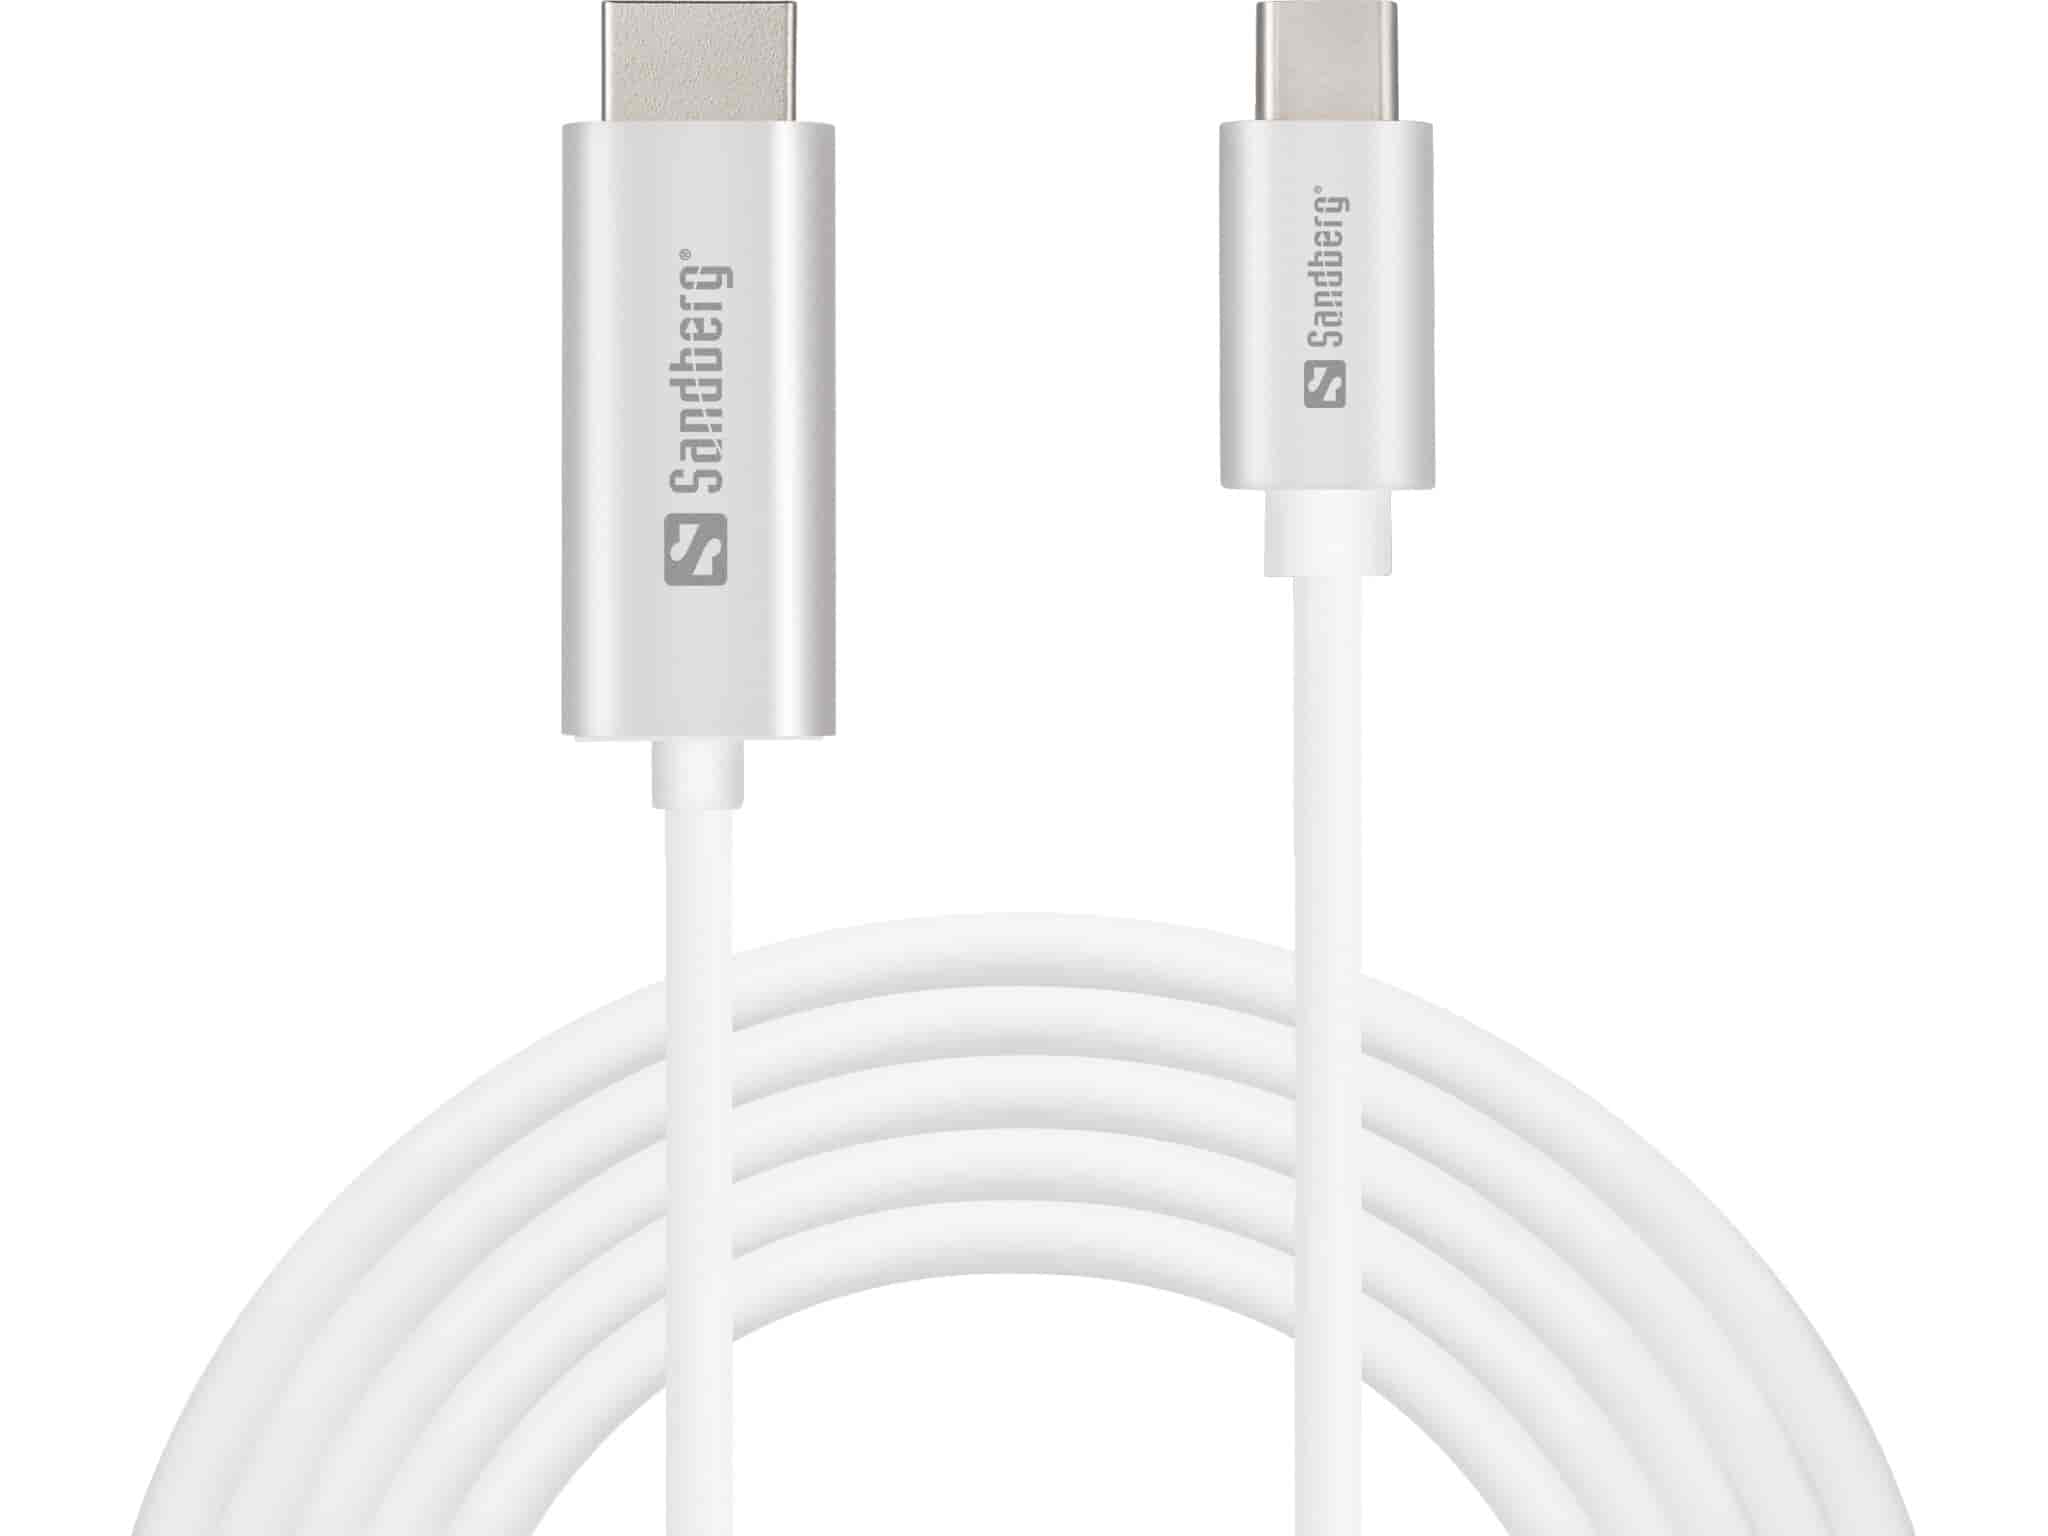 USB-C to HDMI Cable 2M